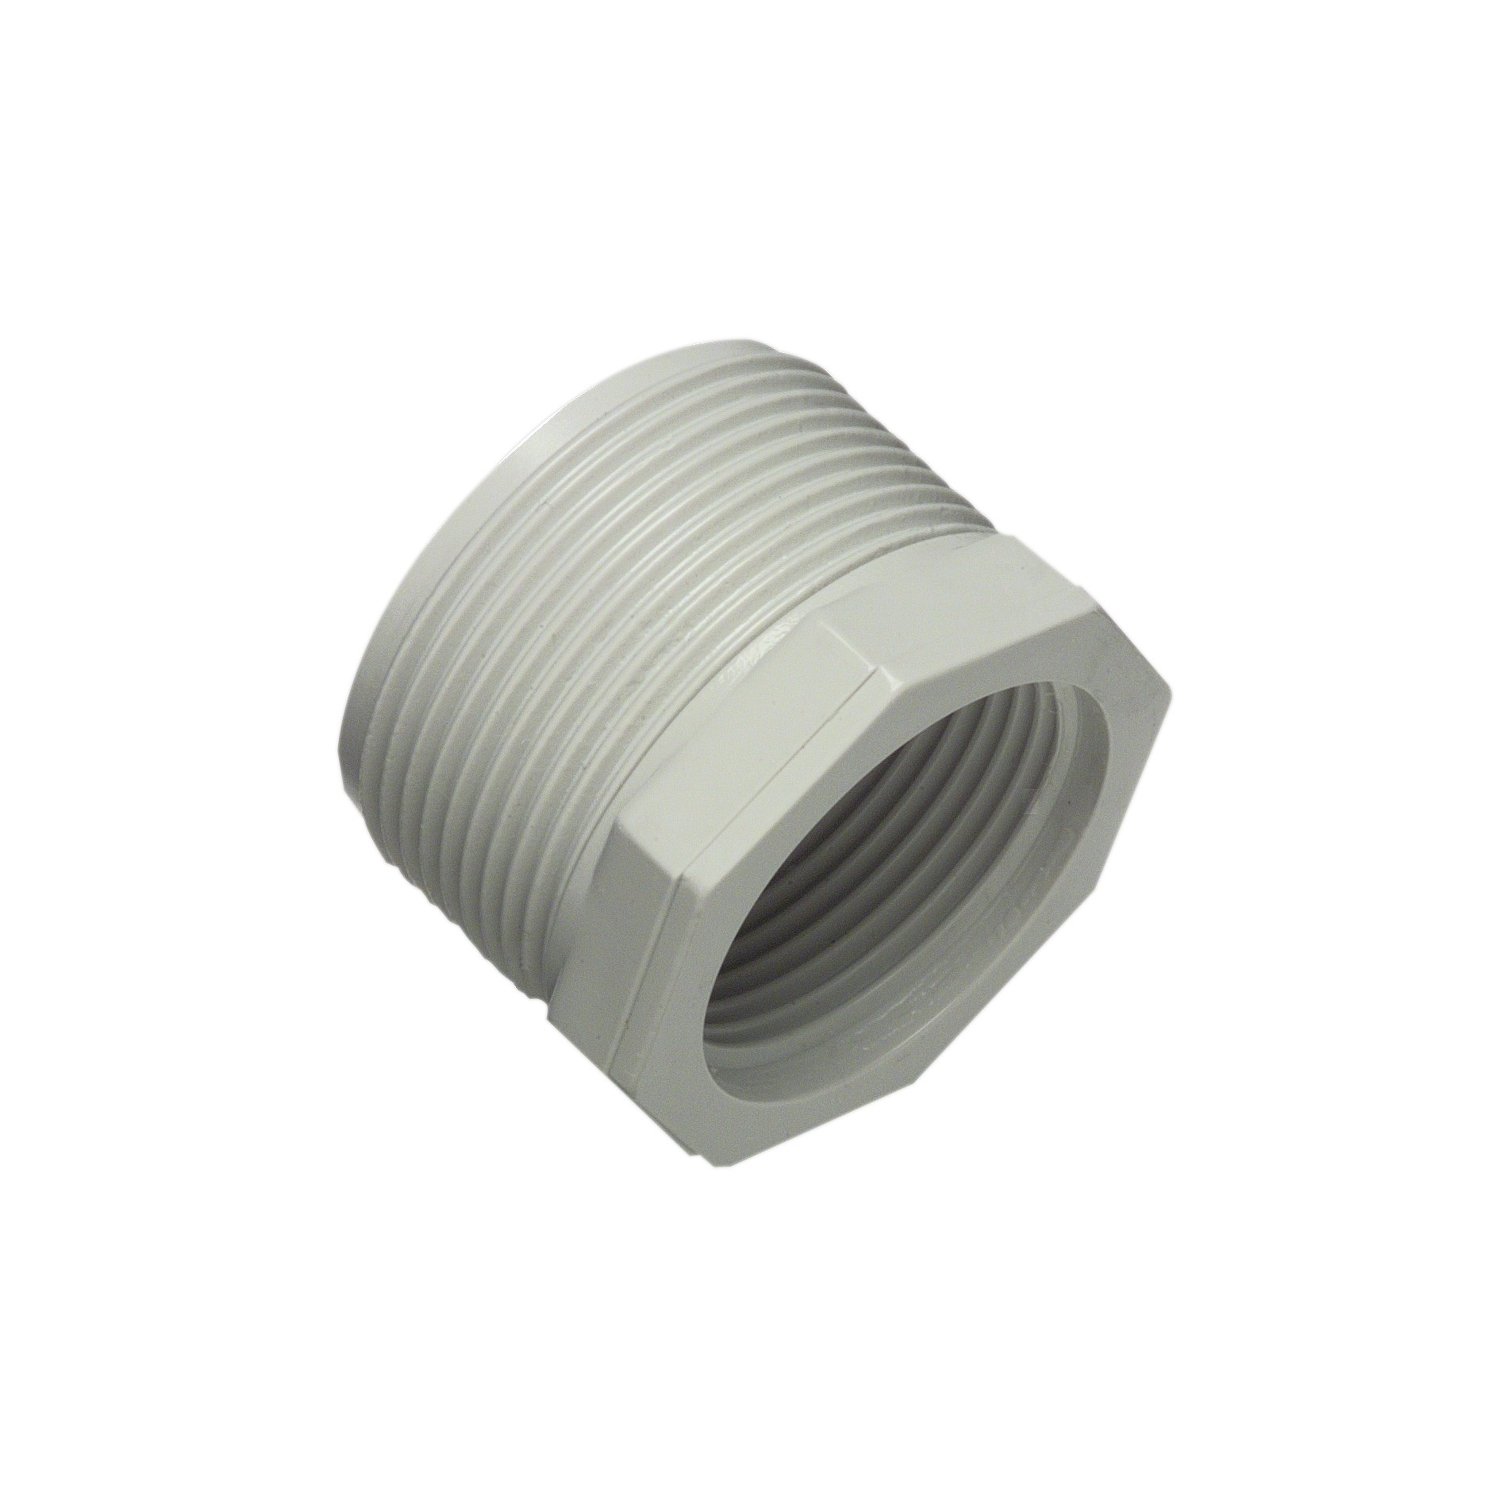 Solid Fittings - PVC, Screwed Reducers, 25mm - 20mm, Grey